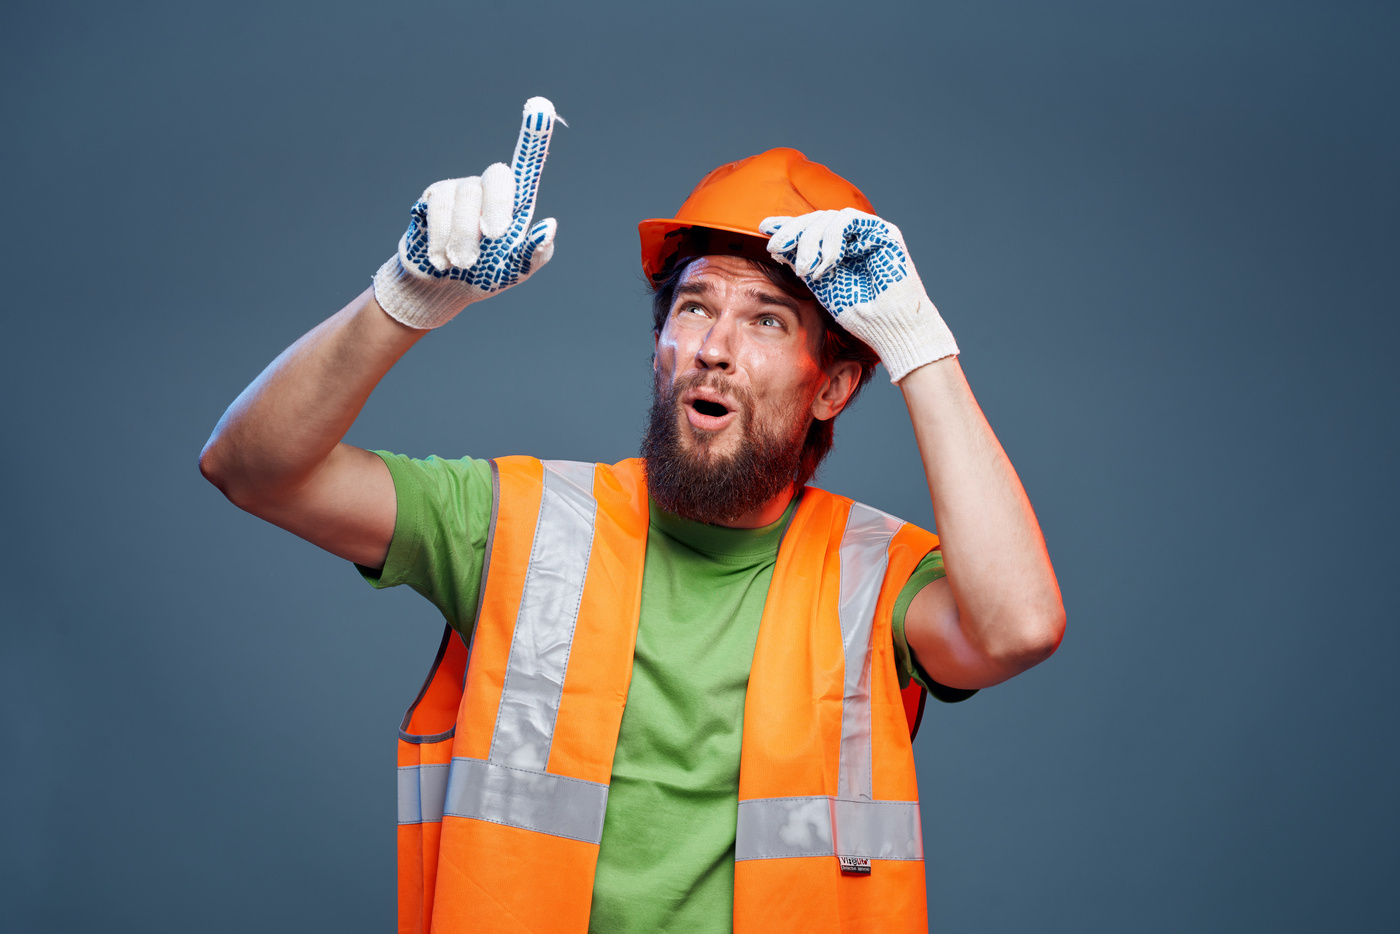 Worker Male Construction Uniform Emotions Cropped View Industry Professional